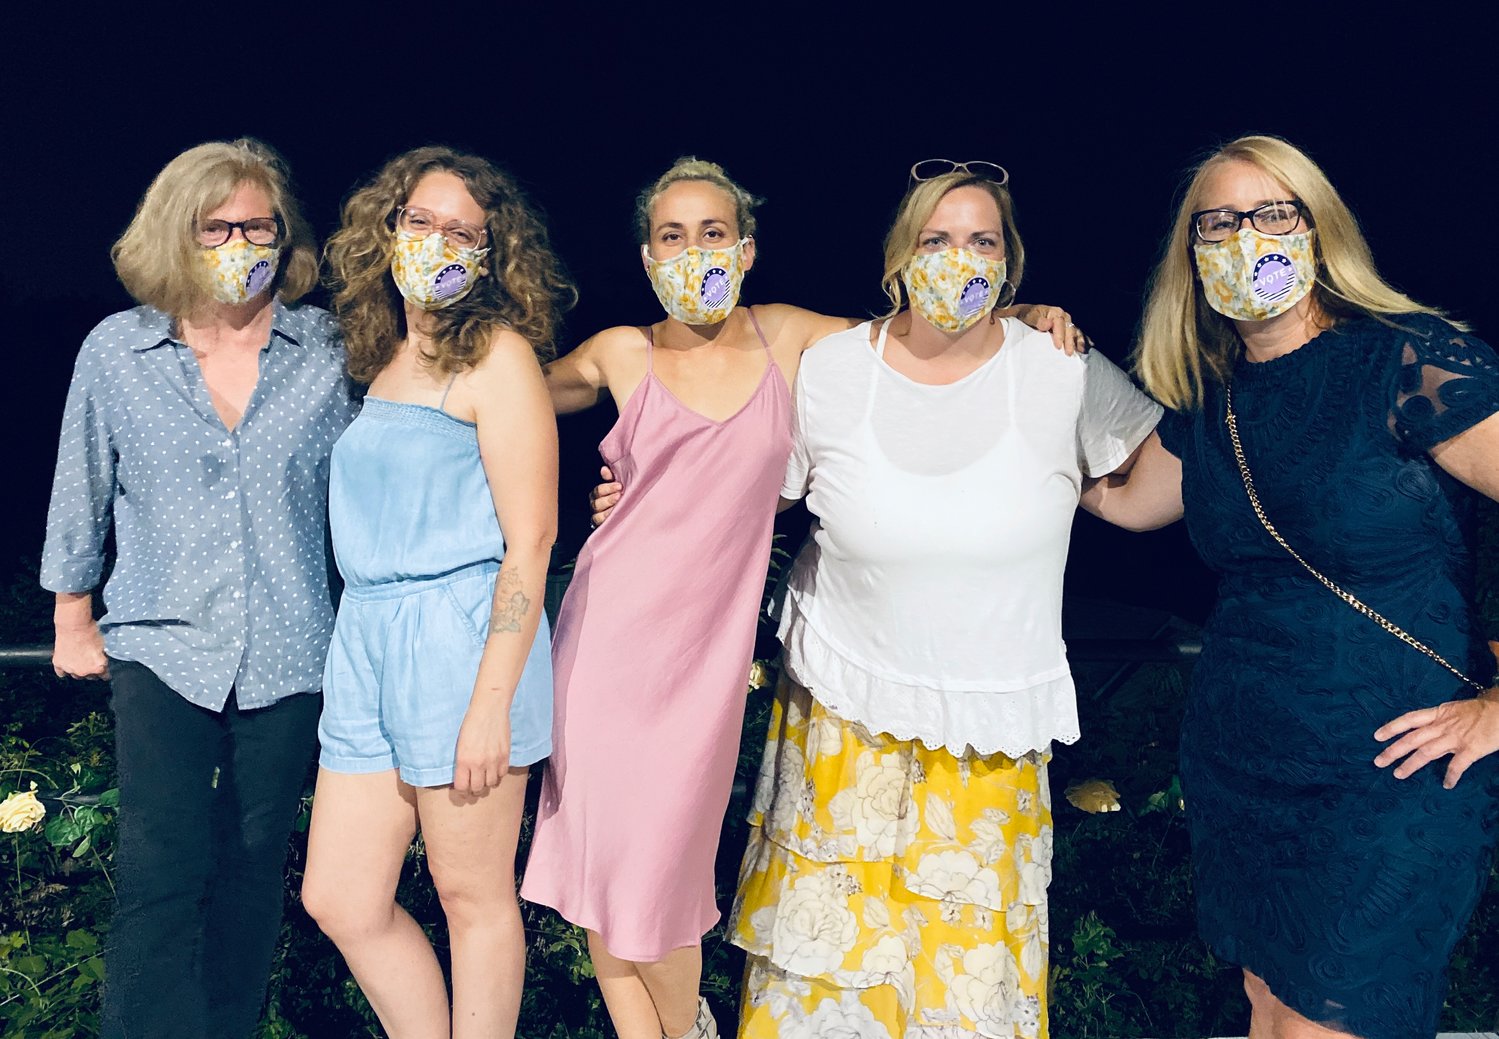 Jaime Teich, top, second from left, has had a dedicated board of directors helping drive LYNP to be successful throughout 2020, including, from left, Mindy Isateich, Hannah Wizenberg, Aimee Renaud and Colleen Woods.